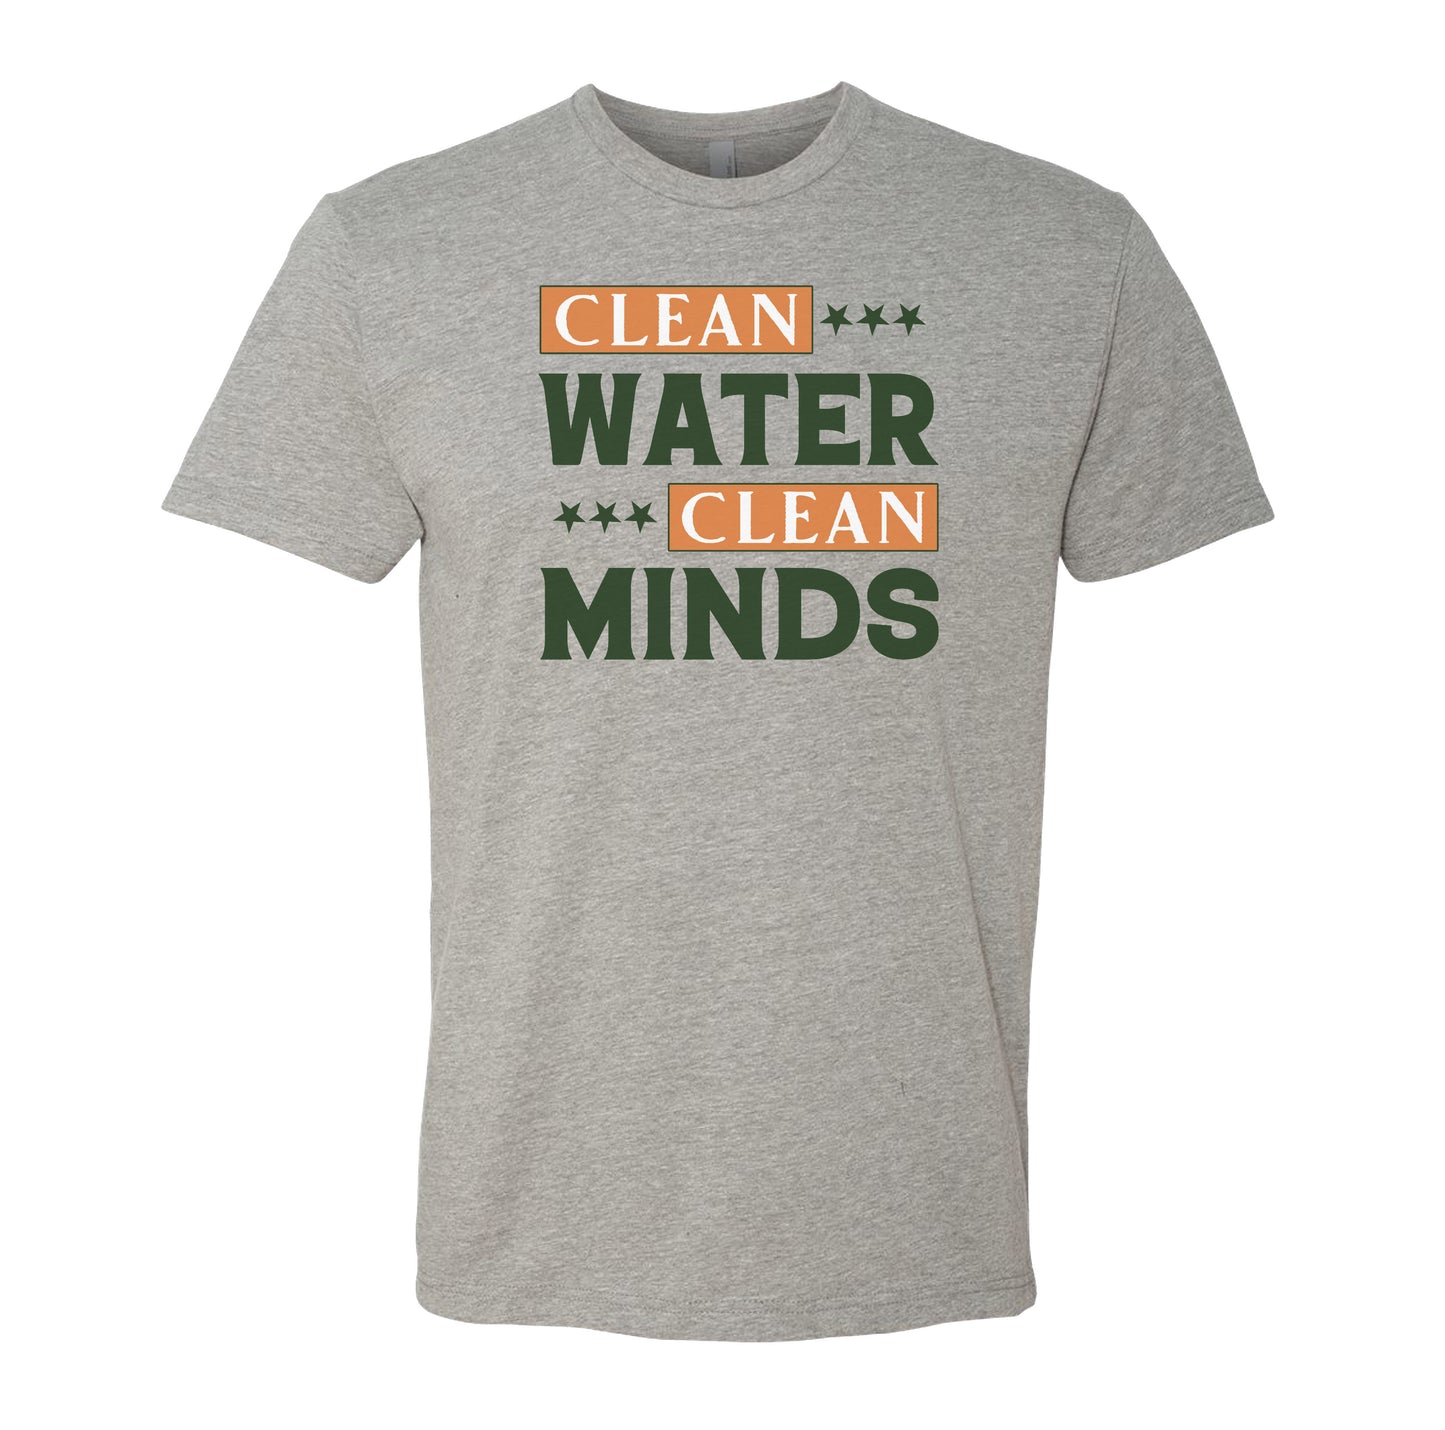 CR Clean Water Clean Minds Tee